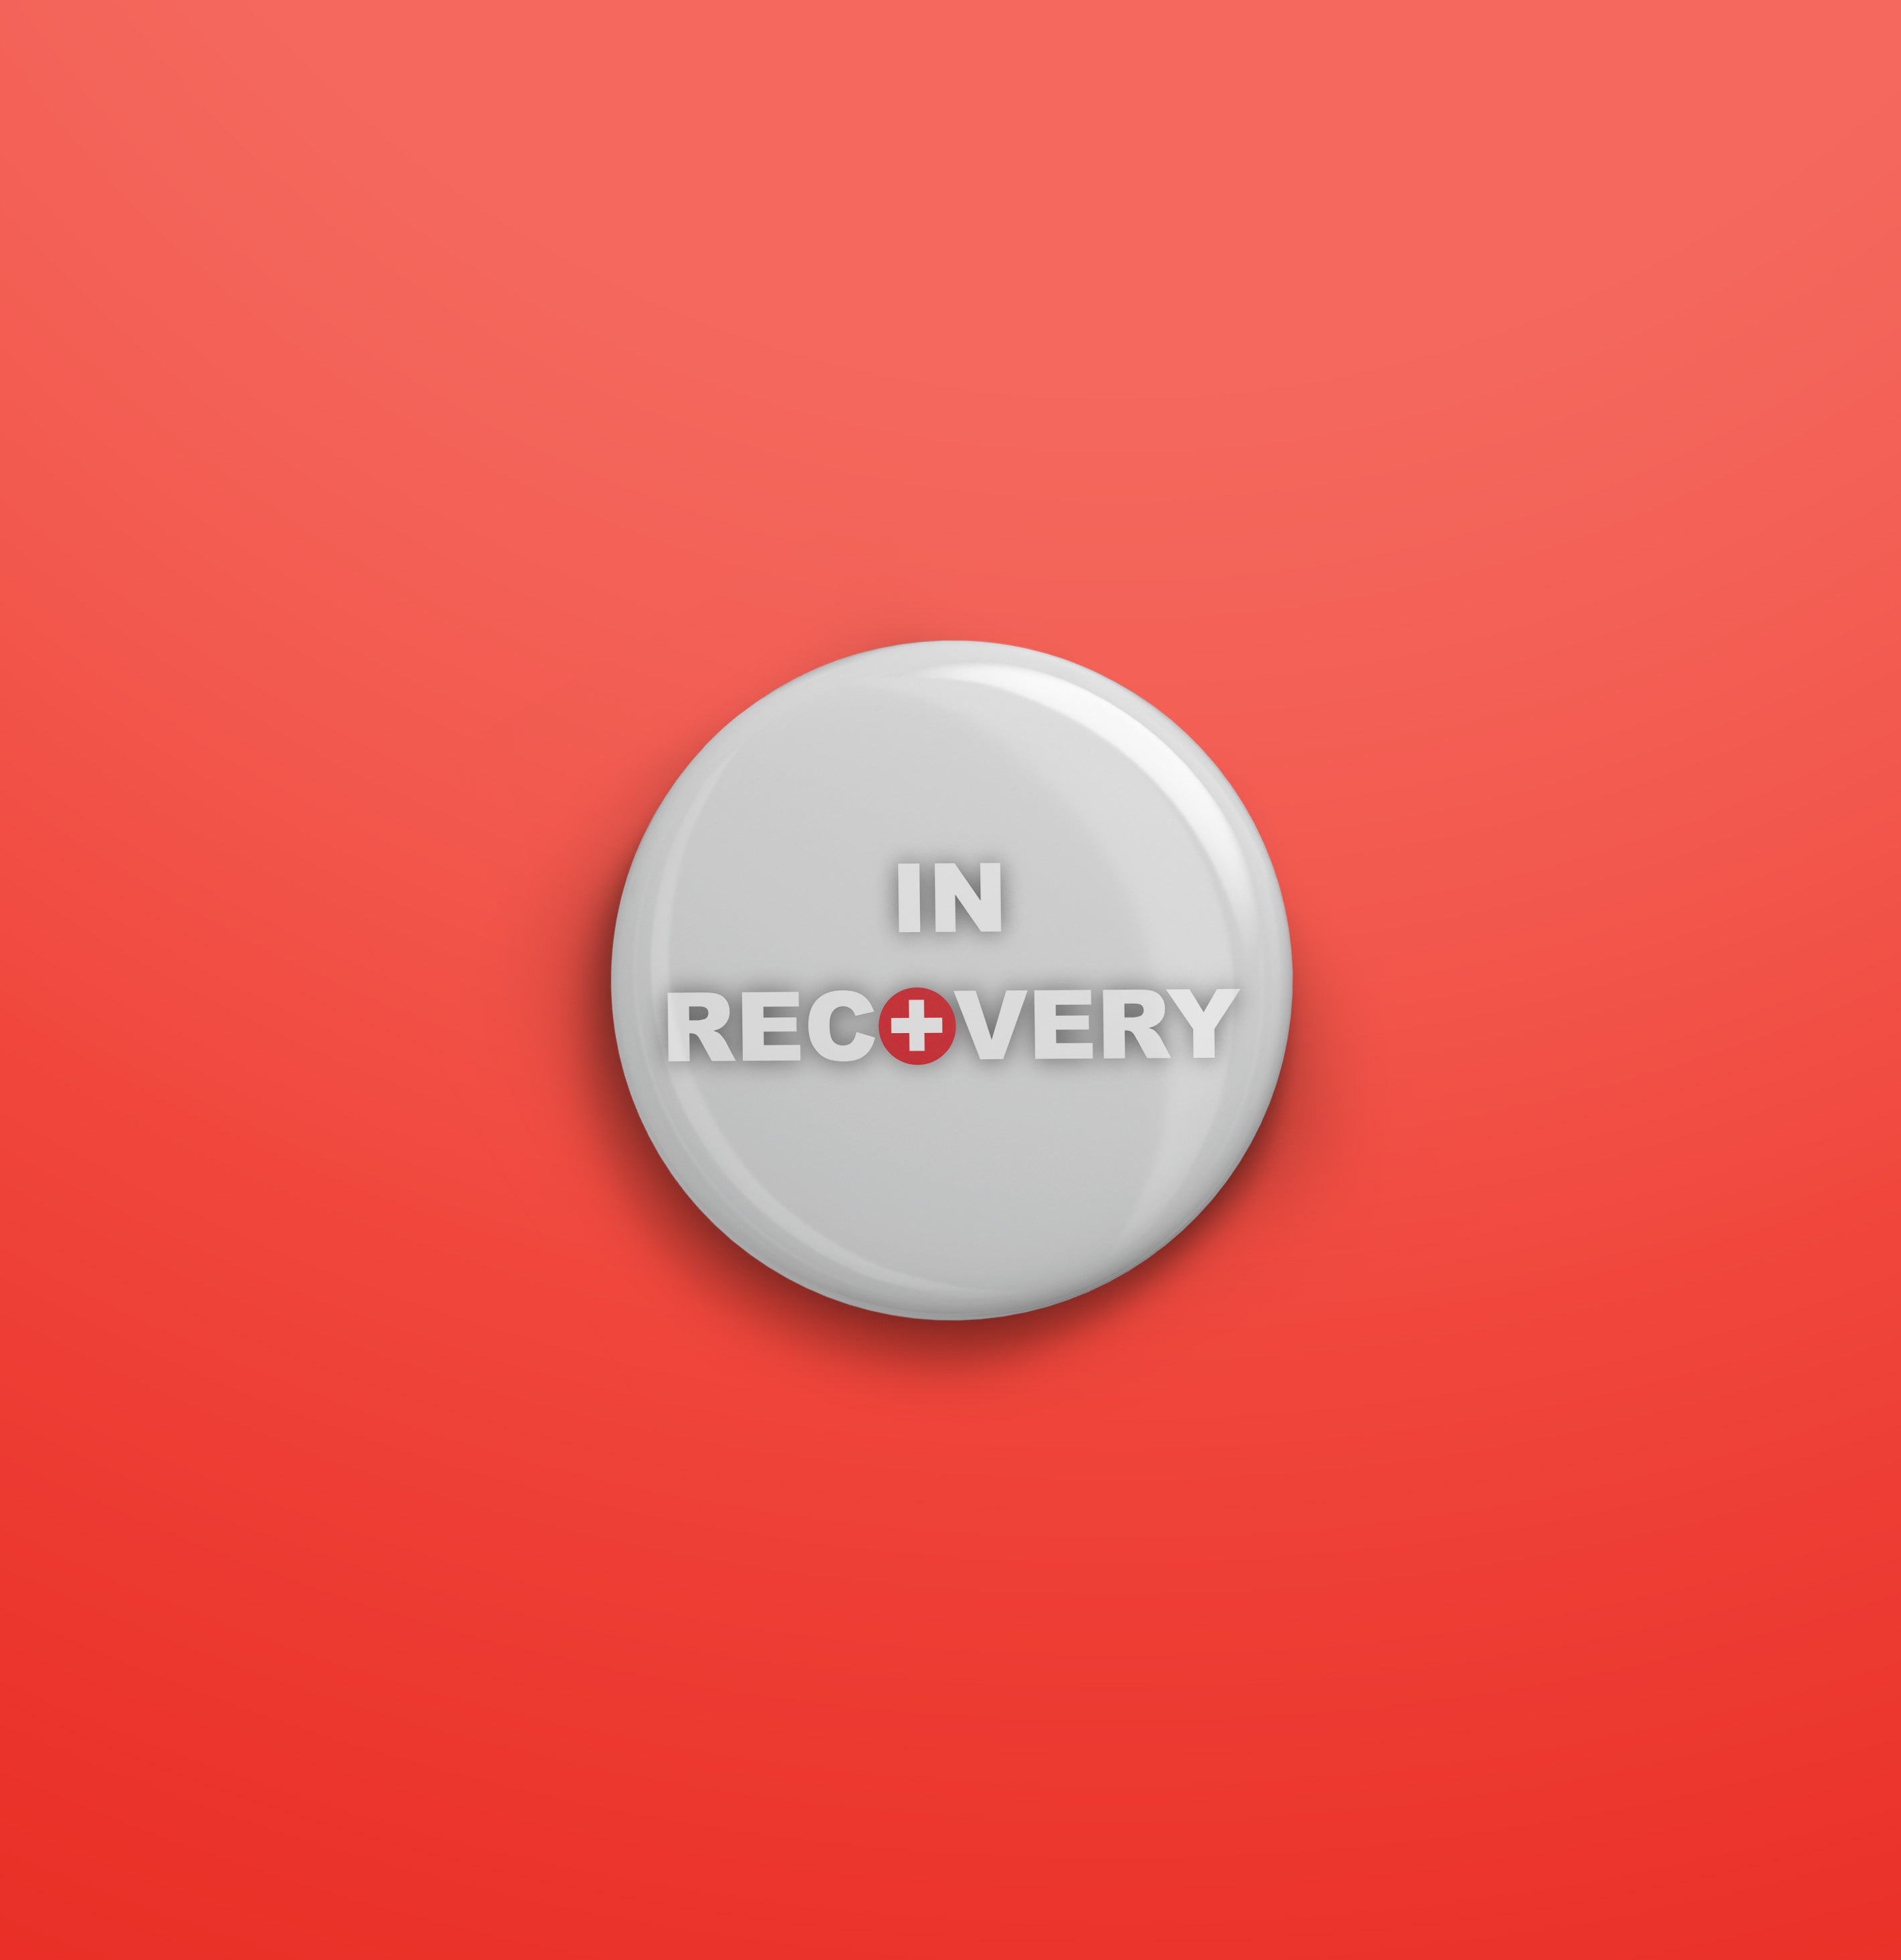 In recovery